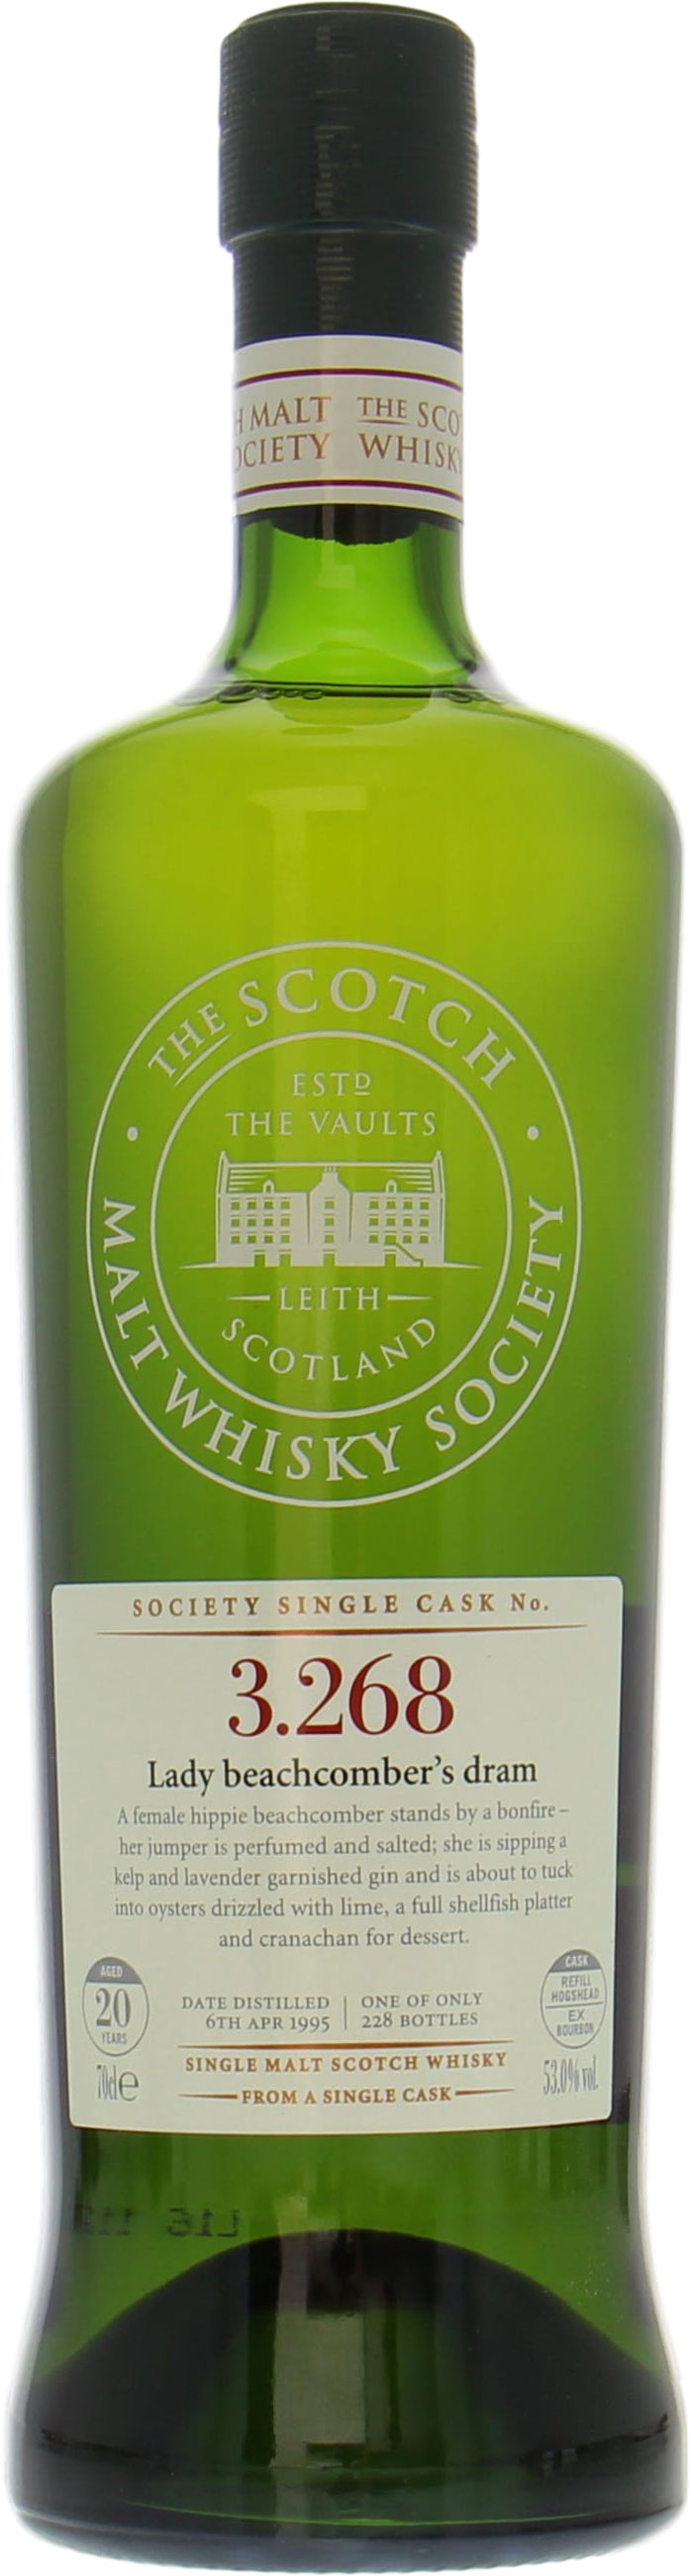 Bowmore - 20 Years Old SMWS 3.268 Lady beachcomber's dram 53% 1995 Perfect